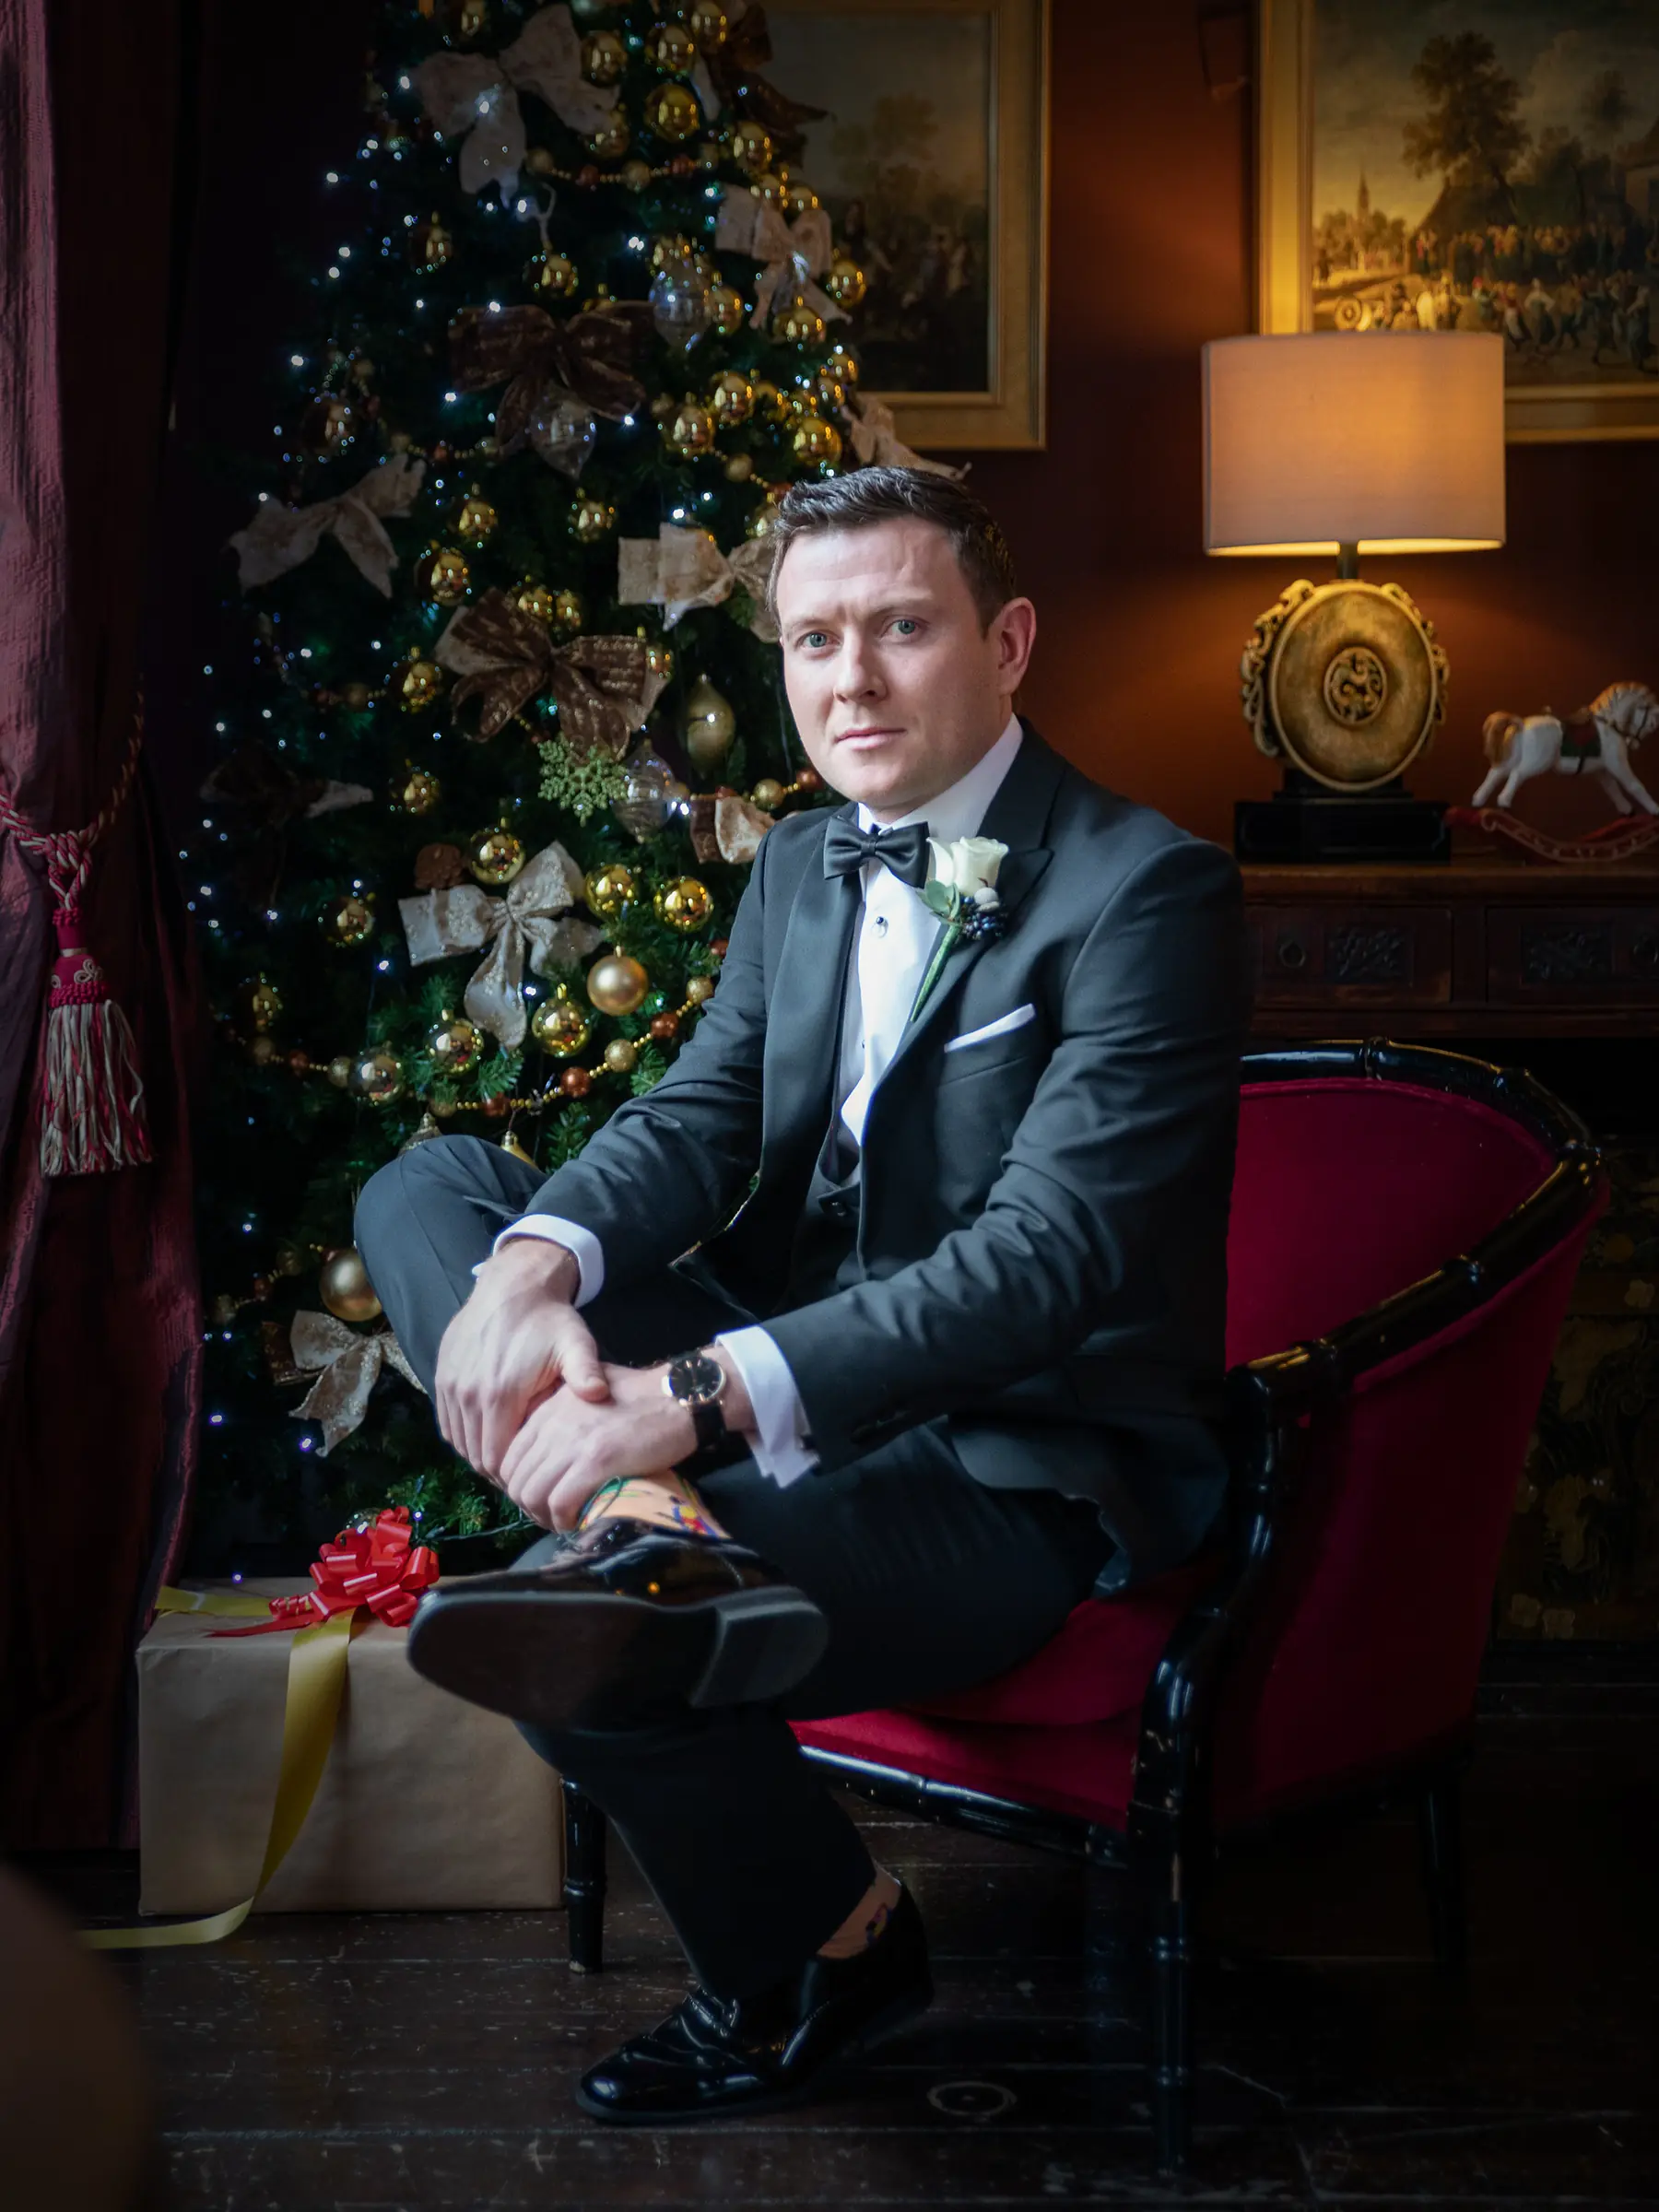 An elegant groom in a tuxedo relaxing next to a beautifully decorated Christmas tree. Read our privacy policy for information on how we handle your personal data.